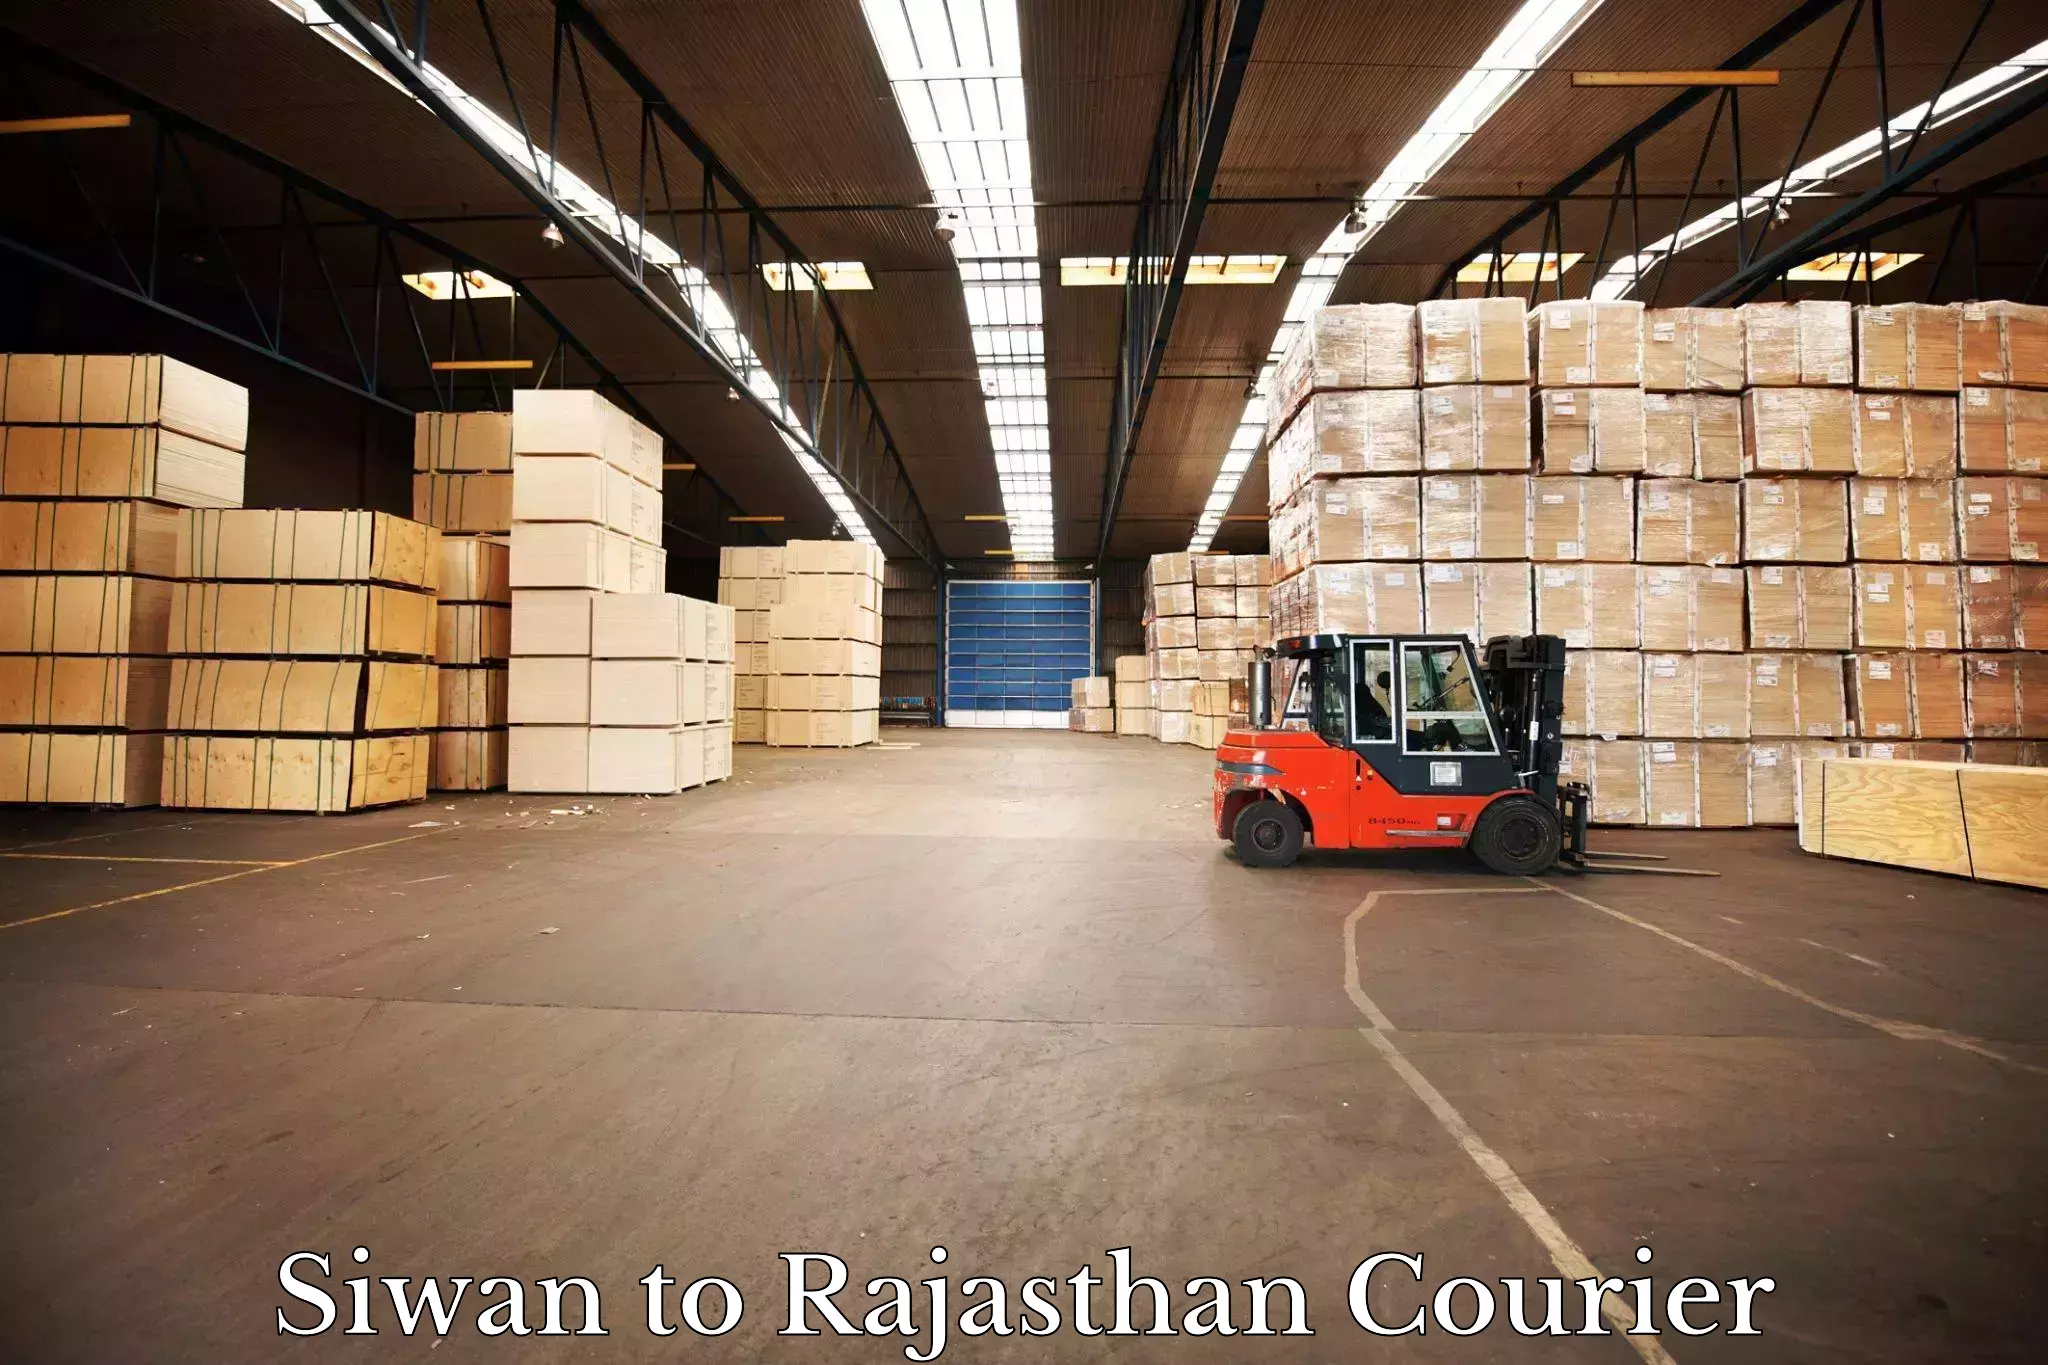 Package delivery network Siwan to Abu Road